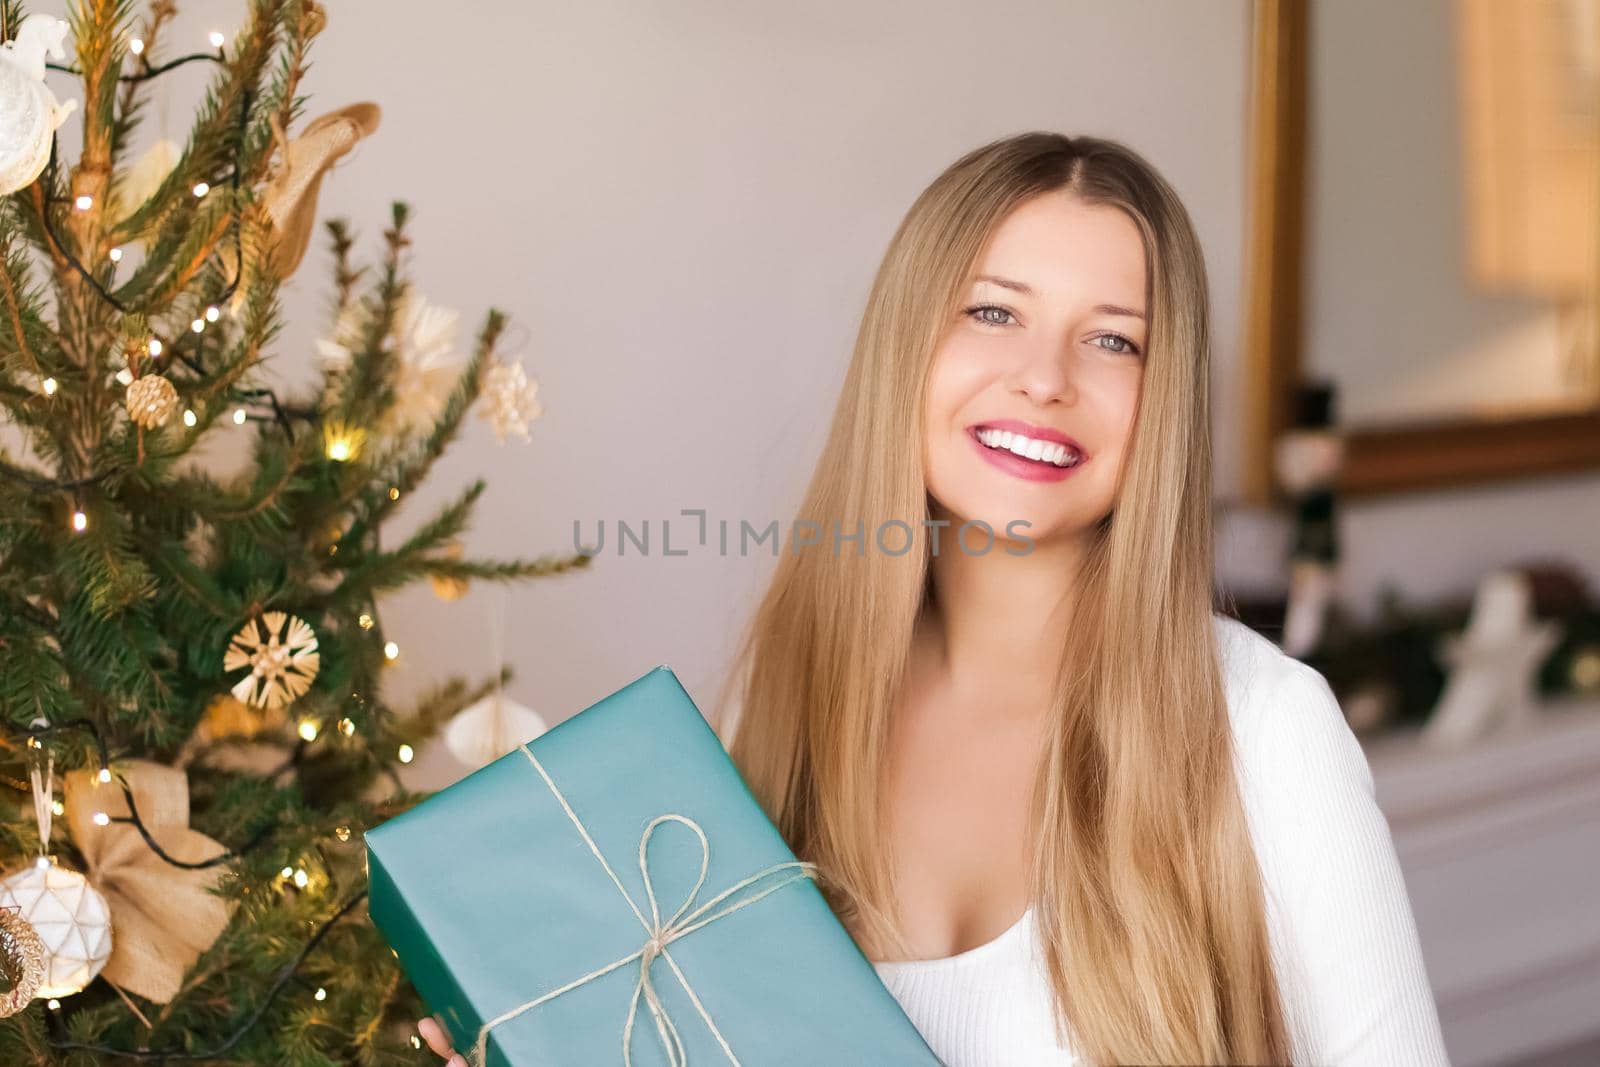 Christmas holiday and sustainable gifts concept. Happy smiling woman holding wrapped present with eco-friendly green wrapping paper.